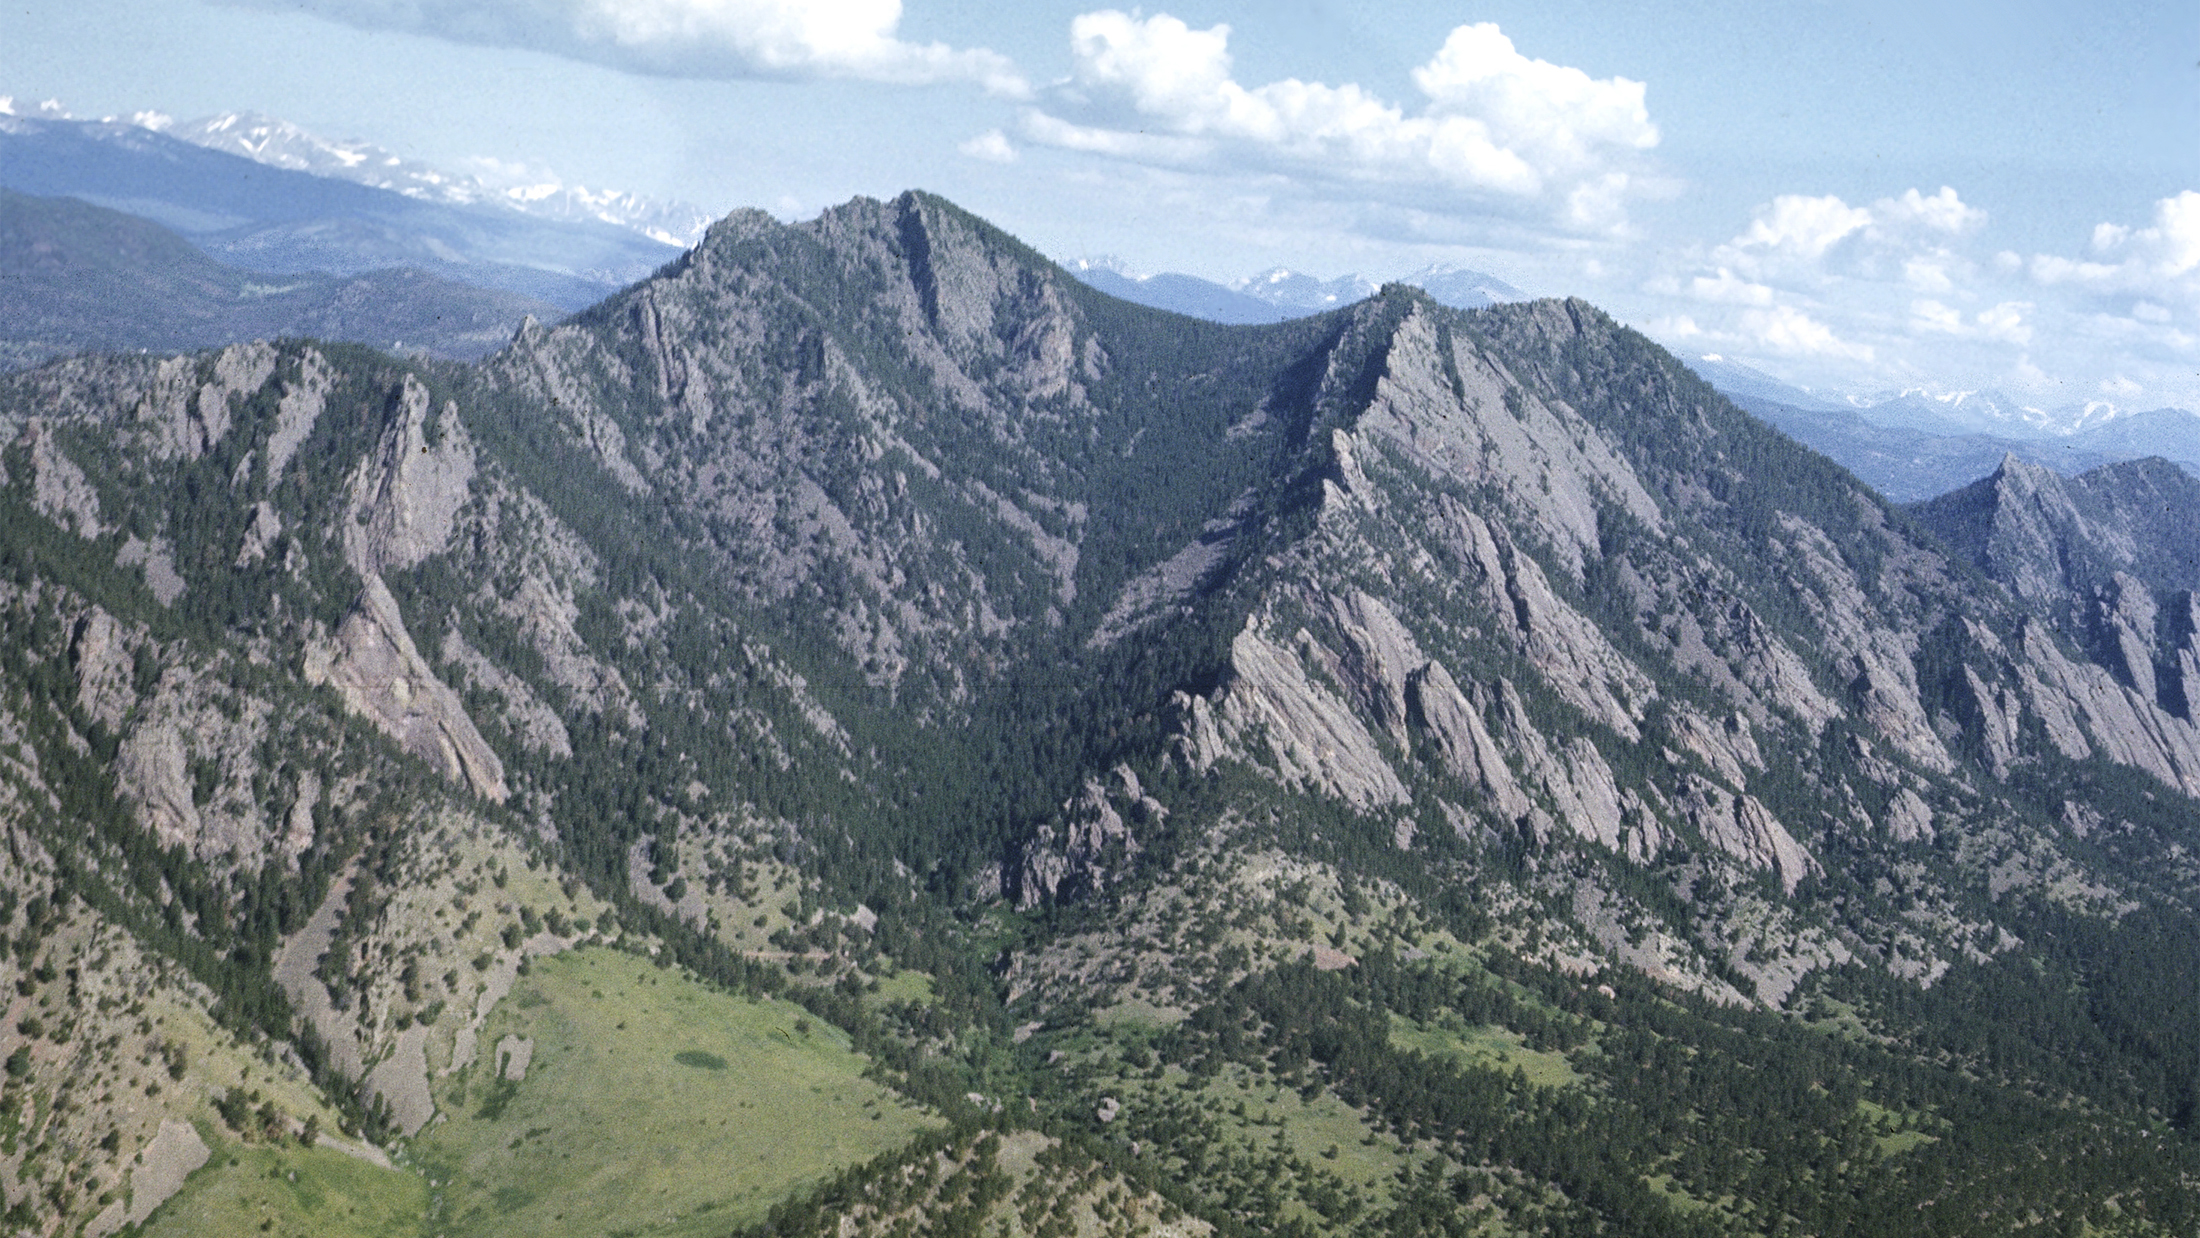 An aerial view of the Boulder Flatirons taken from an airplane